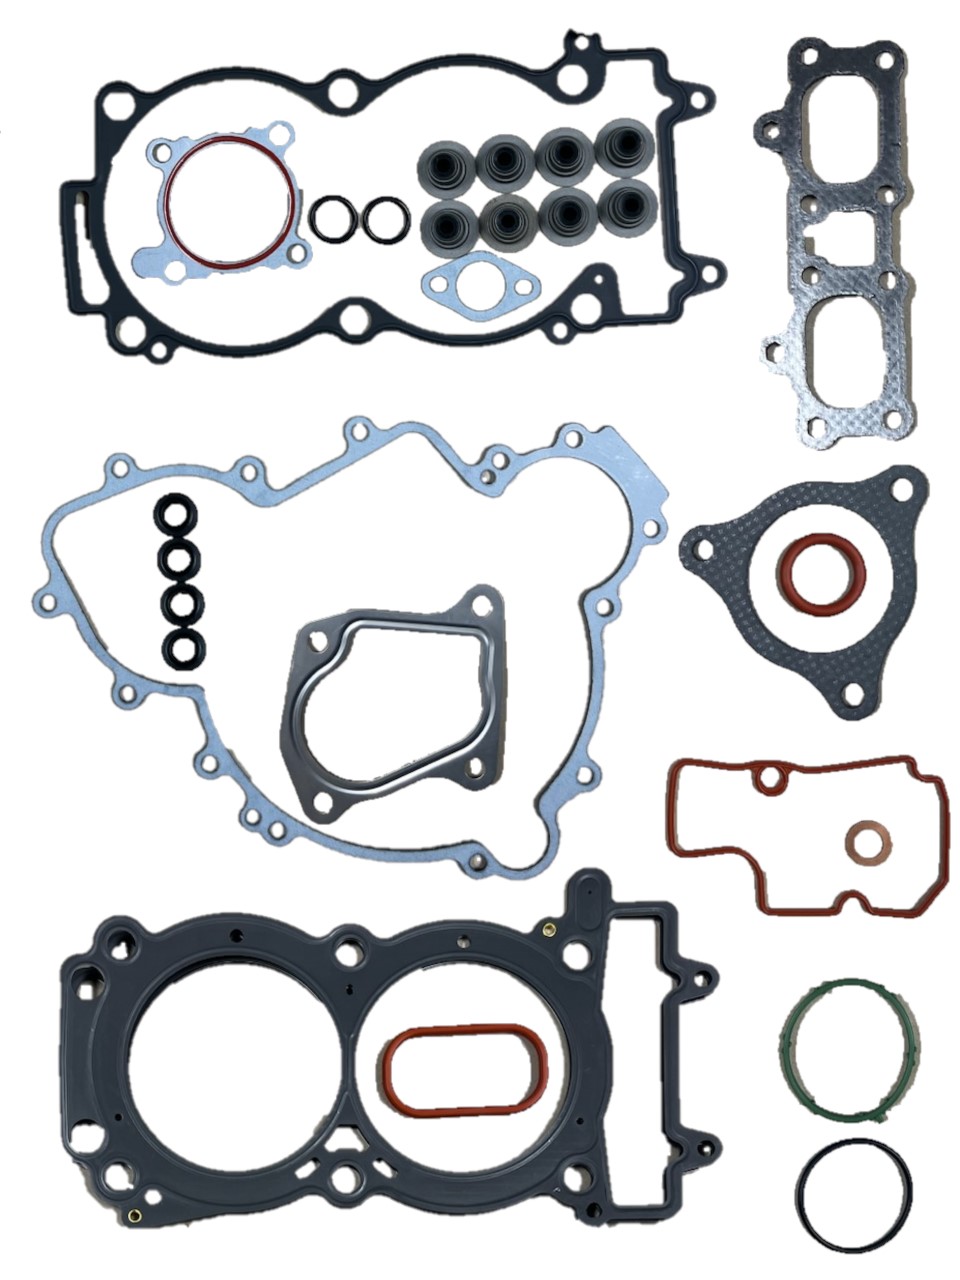 Pro XP and Turbo R Top End Gasket Kit